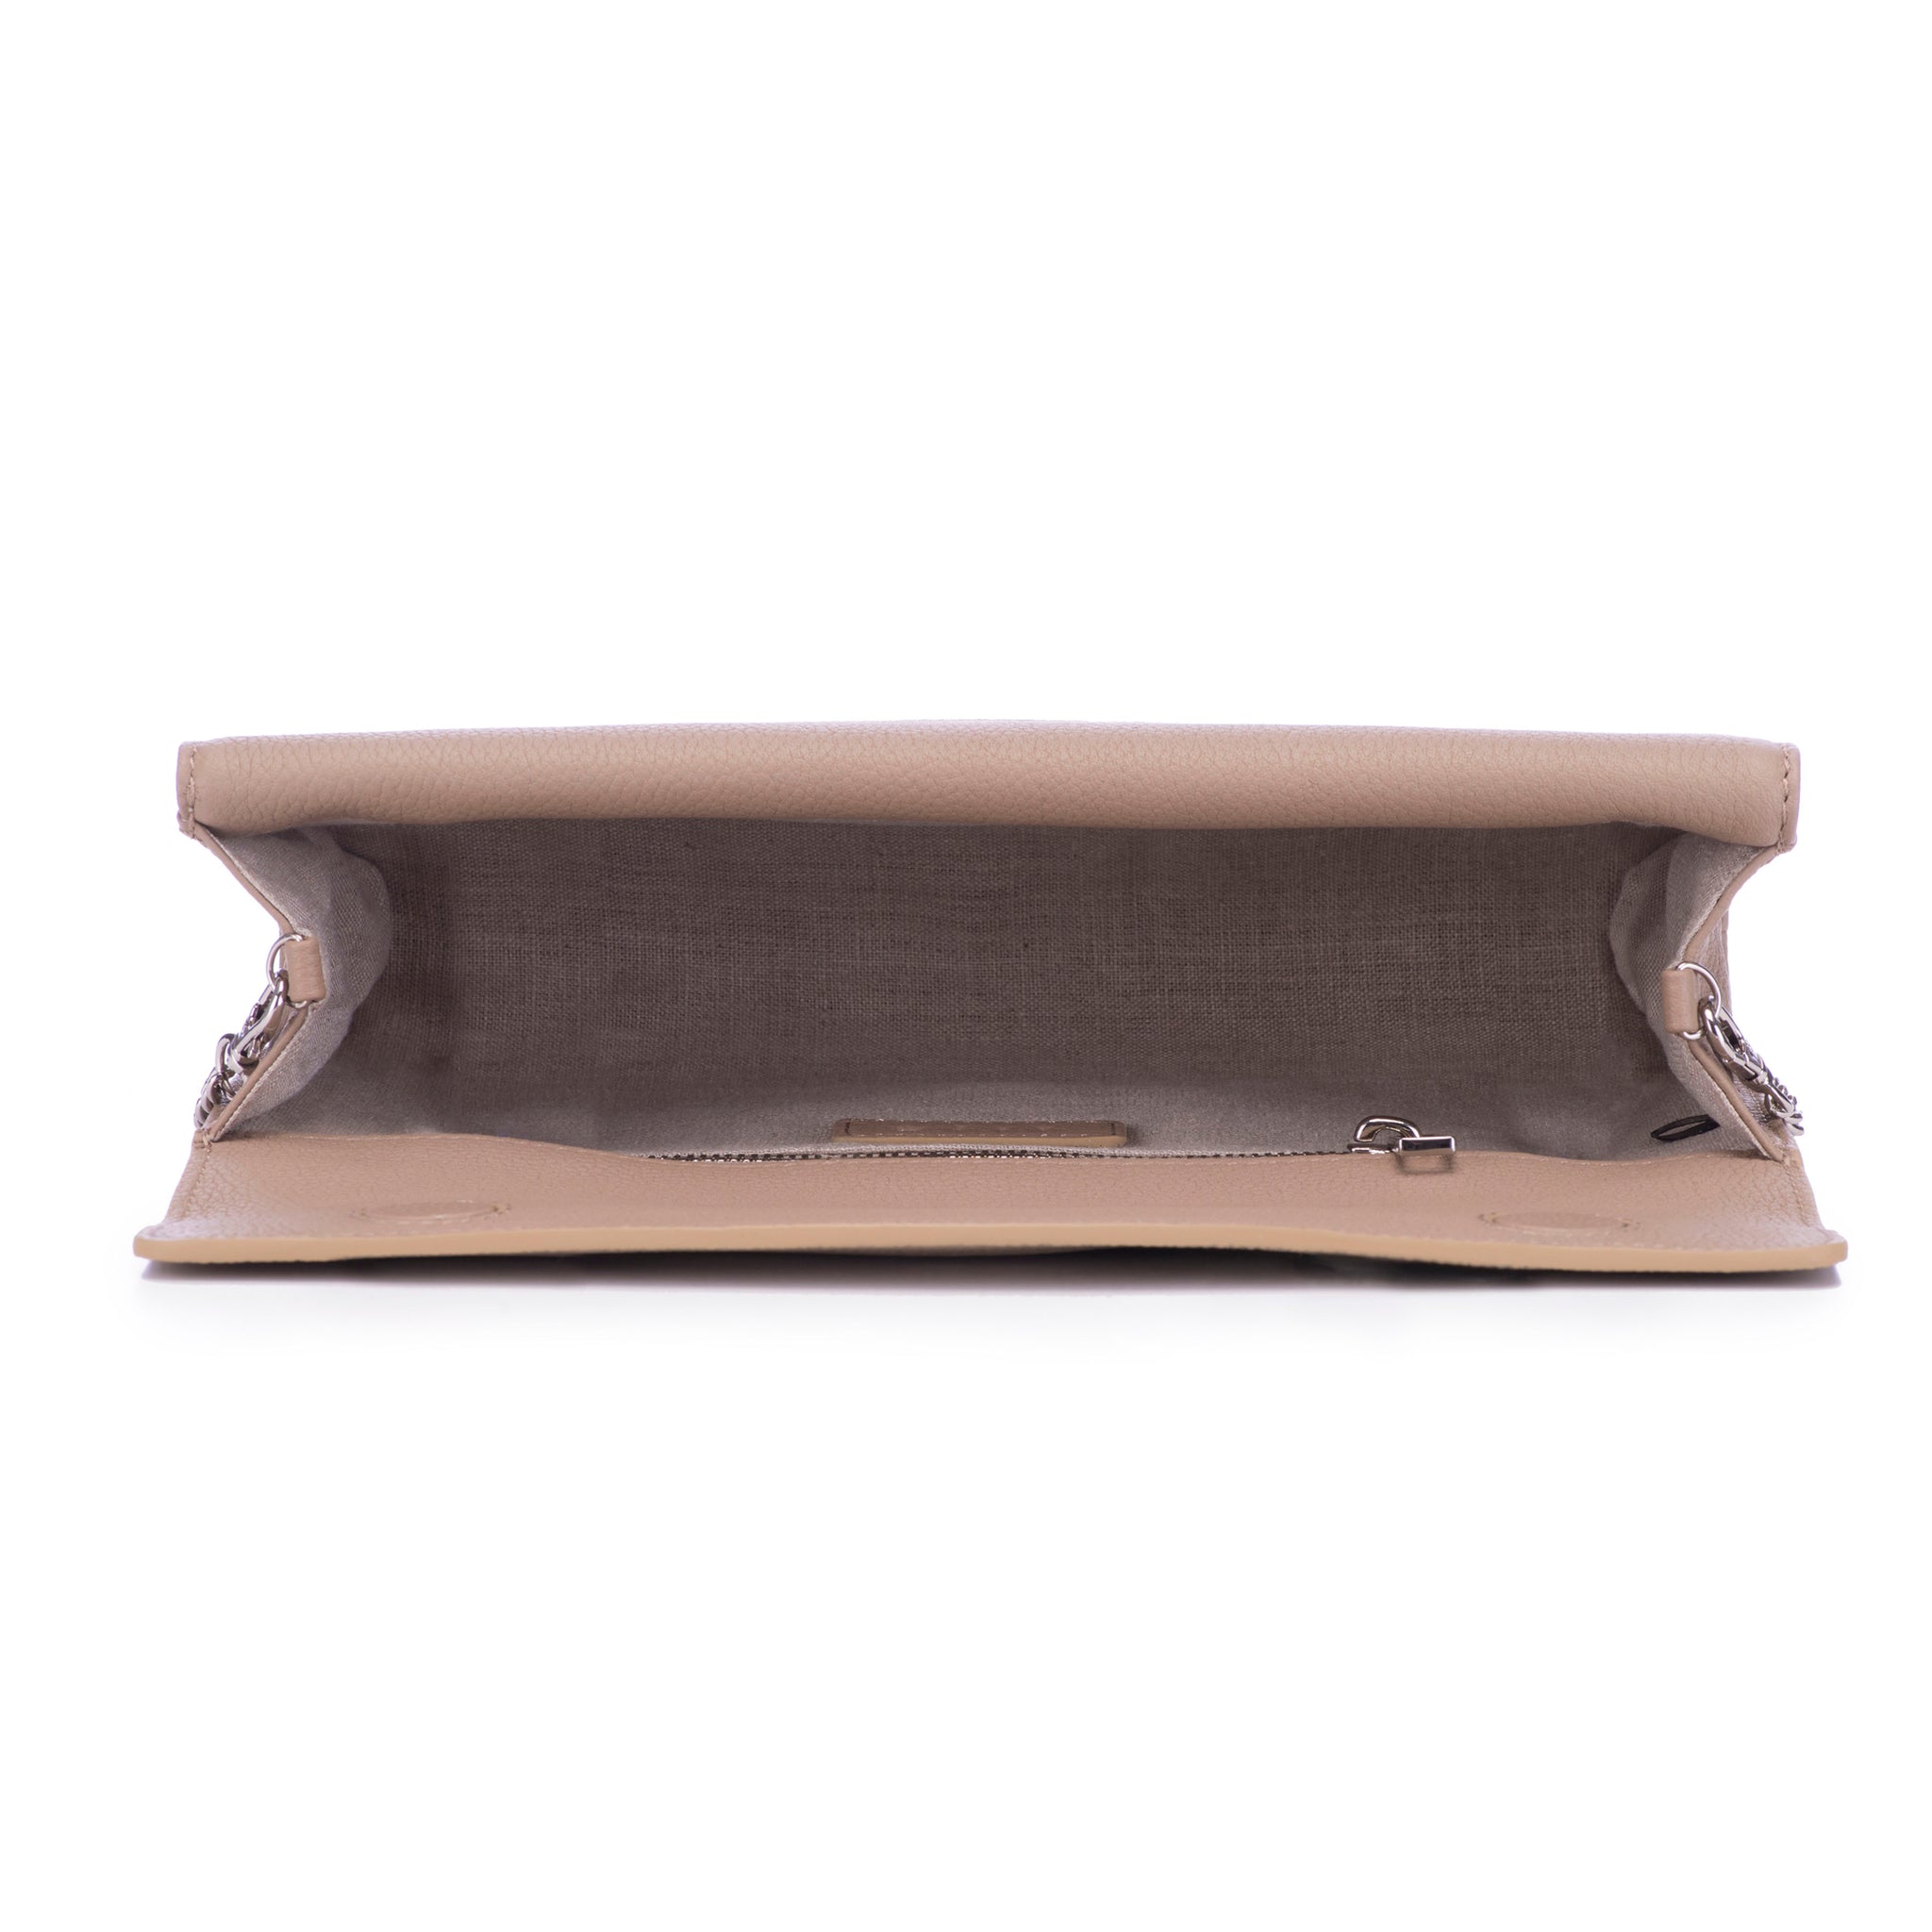 Taupe Shagreen Tan Leather Body Detachable Chain Holly Oversize Clutch Inside View - Vivo Direct